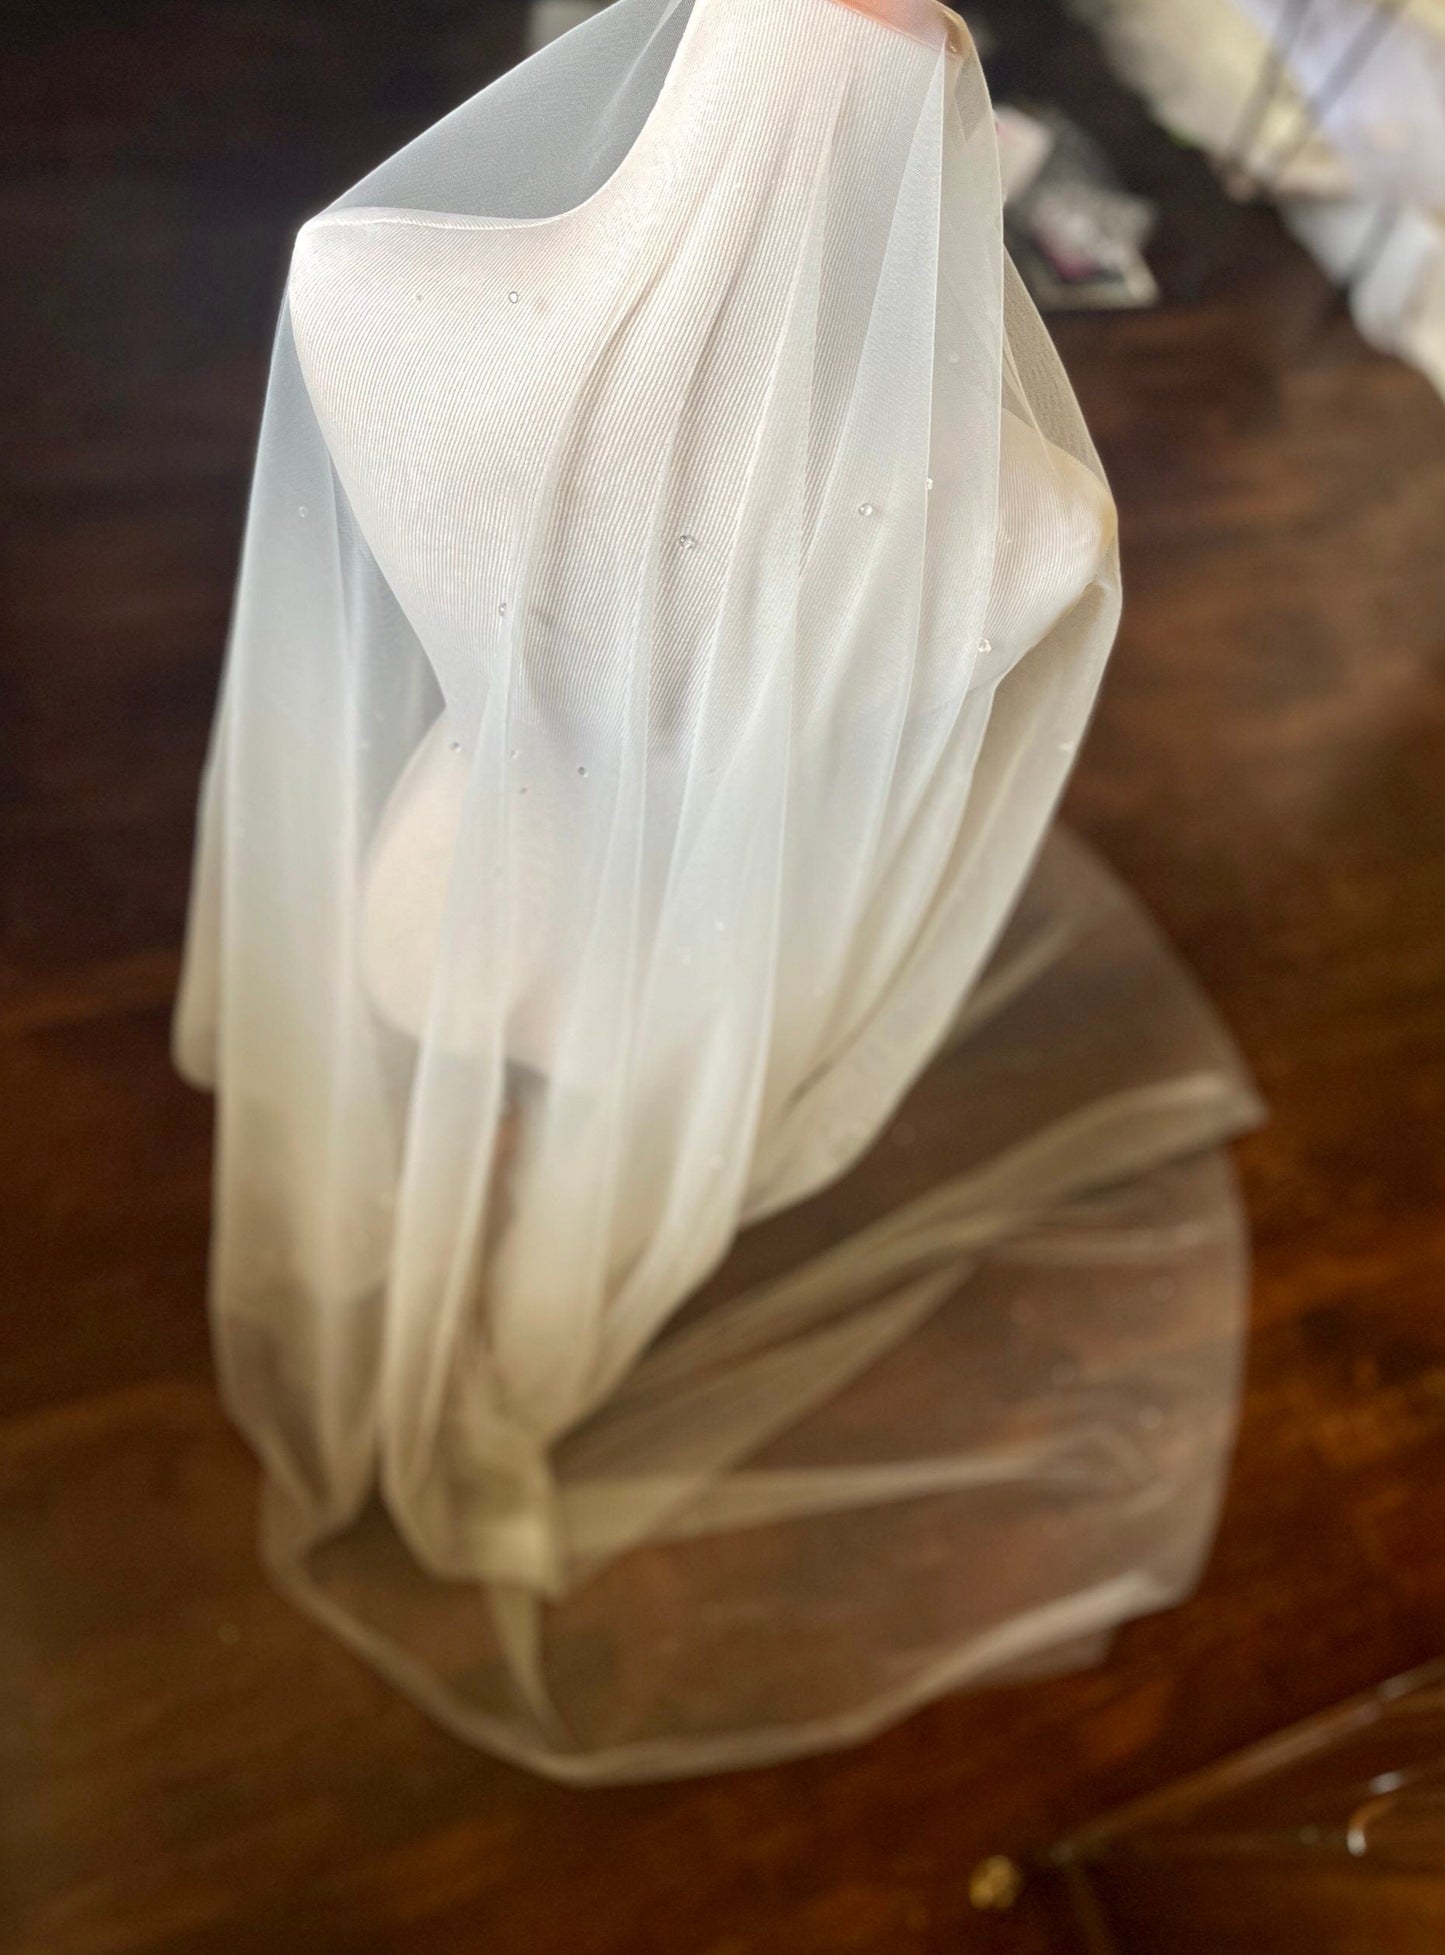 Sofia Richie style dew drop wedding veil with clear resin water droplets